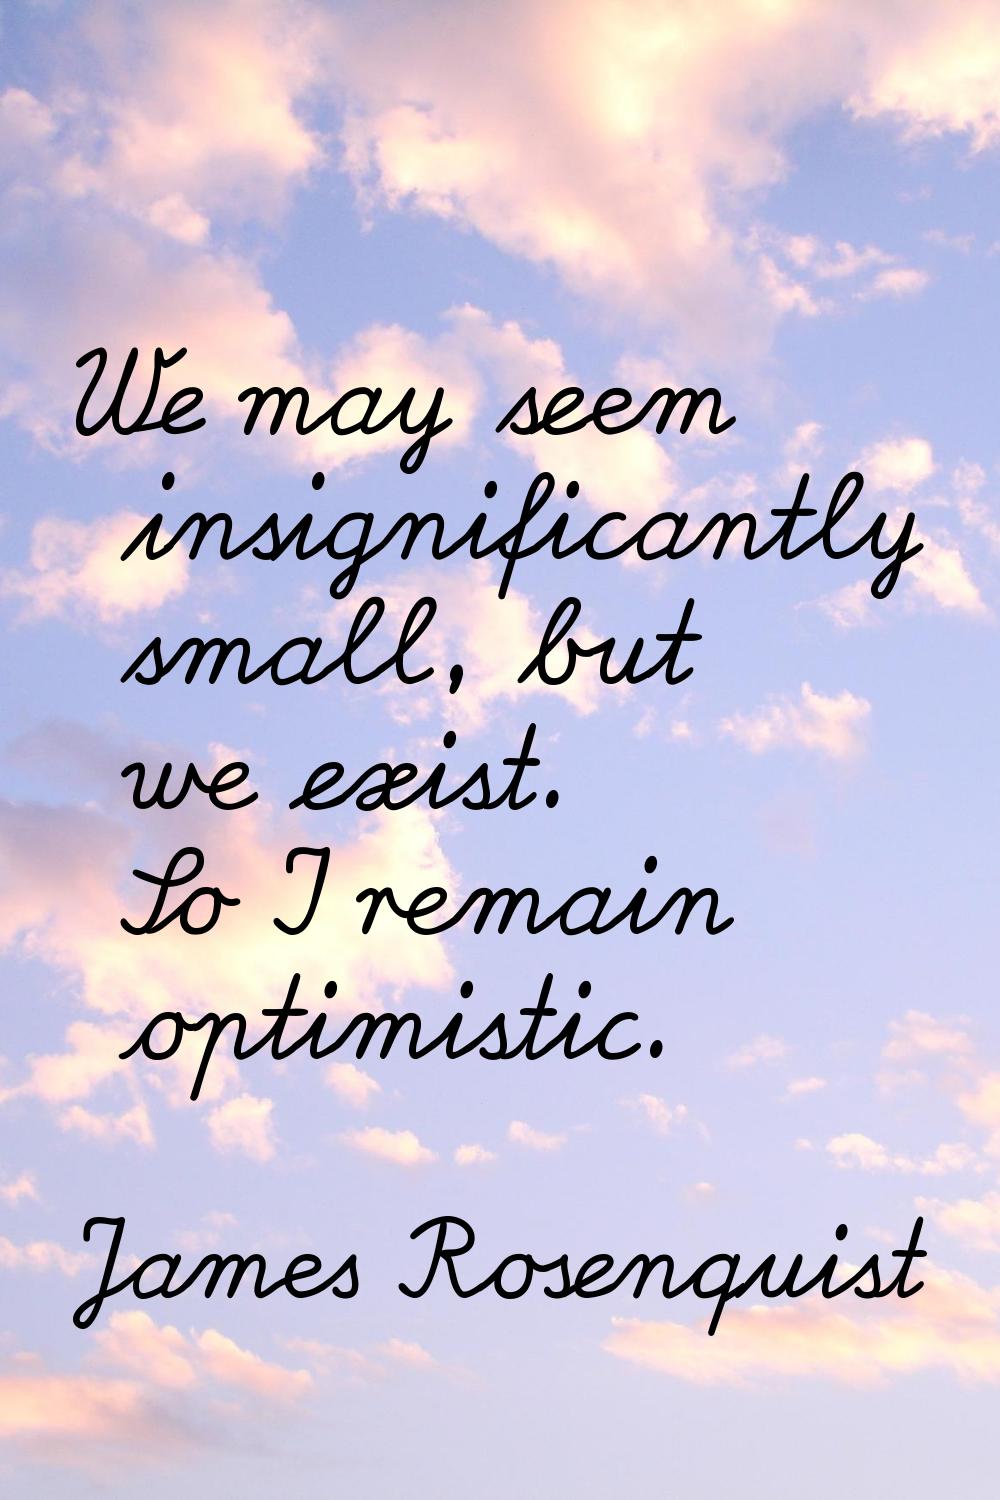 We may seem insignificantly small, but we exist. So I remain optimistic.